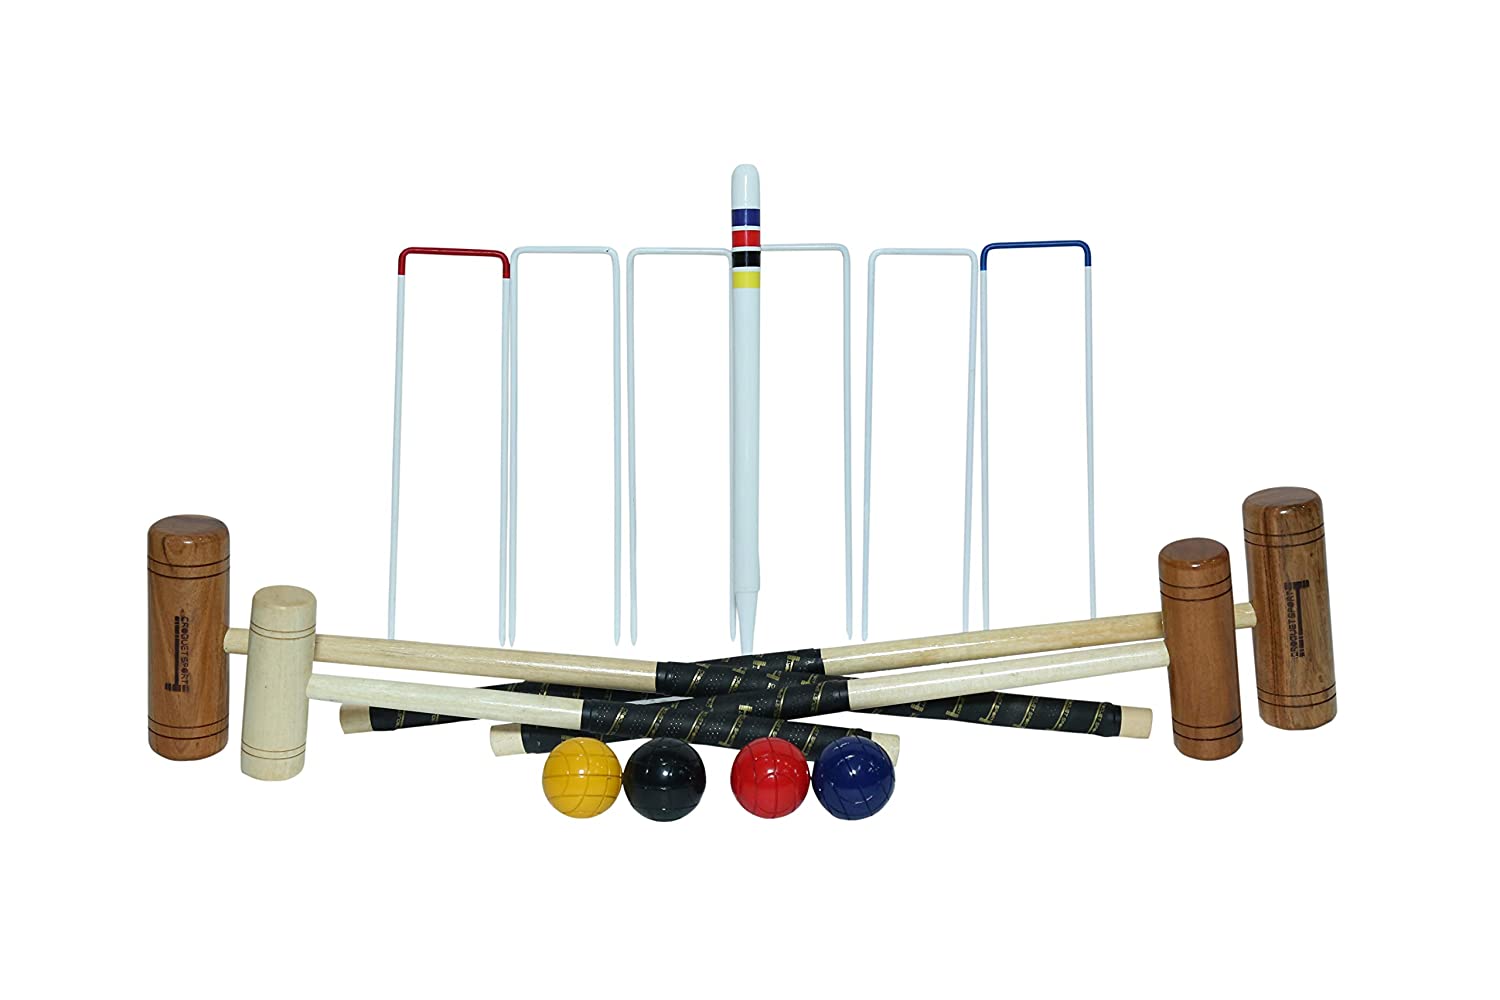 Synco Croquet Sport Family Croquet Set 4 Player, Family Set with Croquet Balls and <br> Accessories (38 Inch), Perfect<br> for Lawn, Backyard, Parks and Gardens for Fun, Party and <br>Family Games. - 3